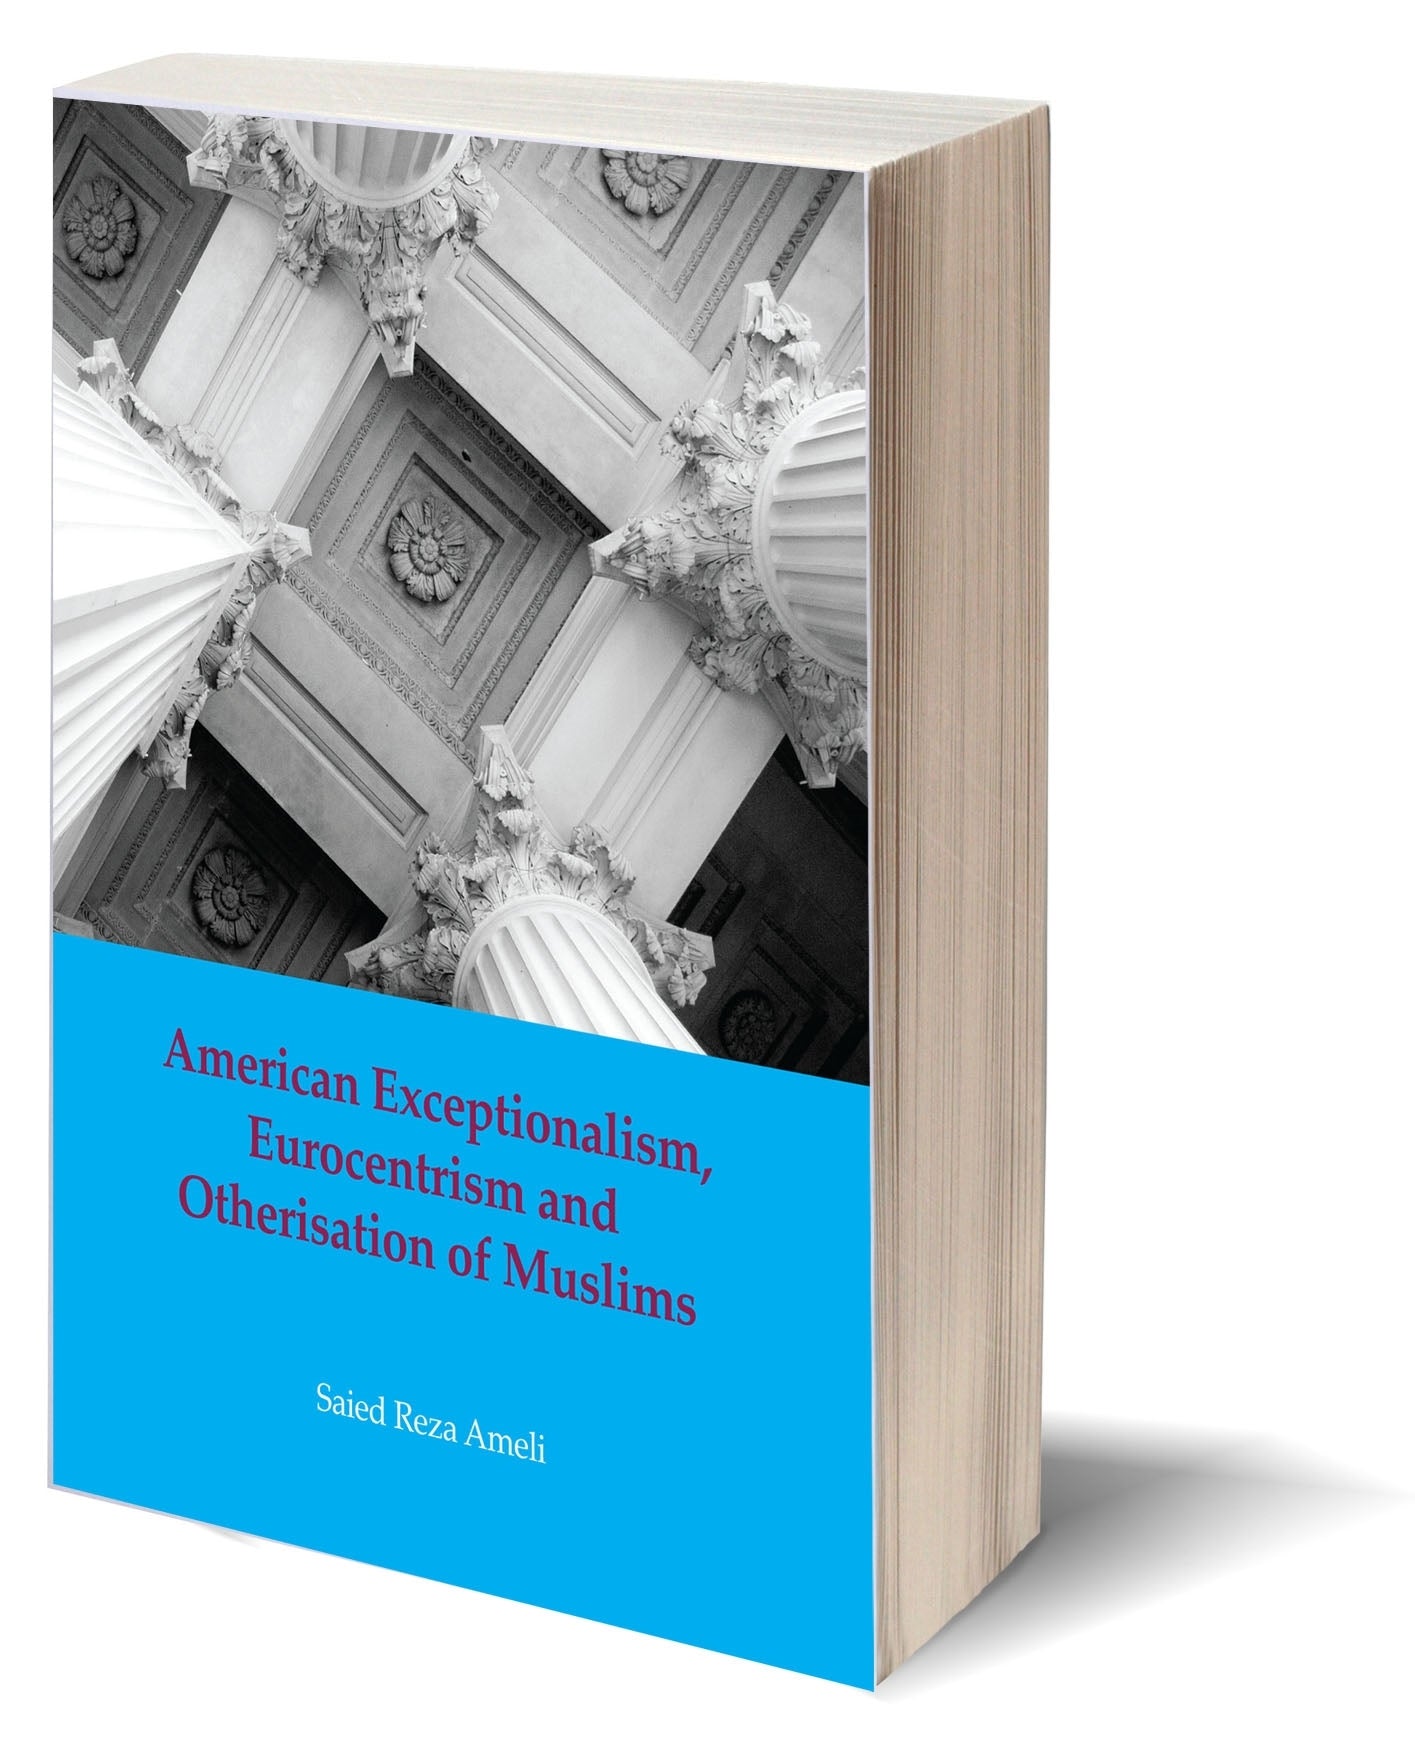 American Exceptionalism, Eurocentrism and Otherisation of Muslims - Saied Reza Ameli